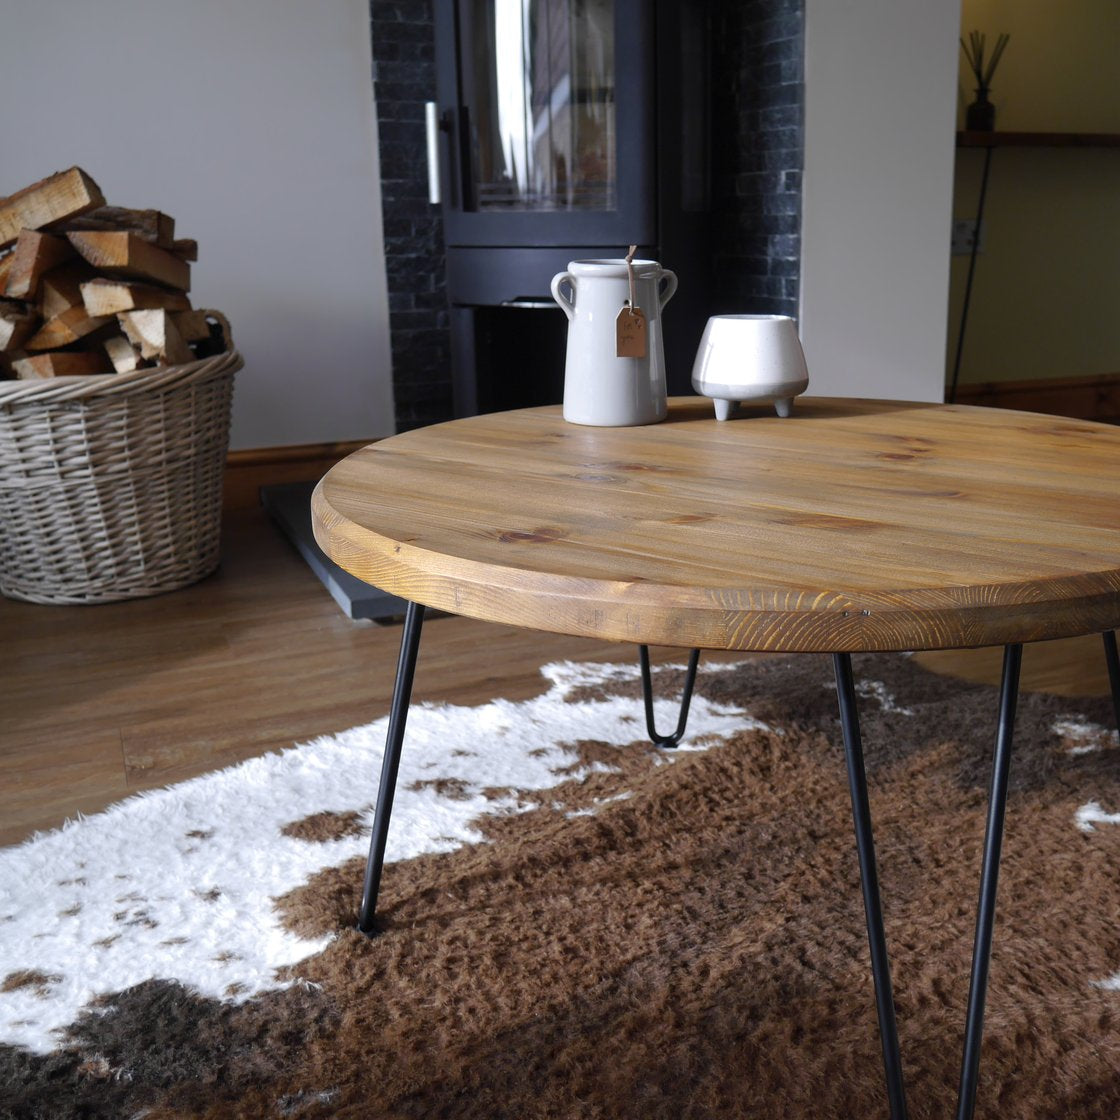 Wood Round Coffee Table with Hairpin Legs, Solid Pine Modern Farmhouse Table, Mid Century Modern Decor handmade furniture